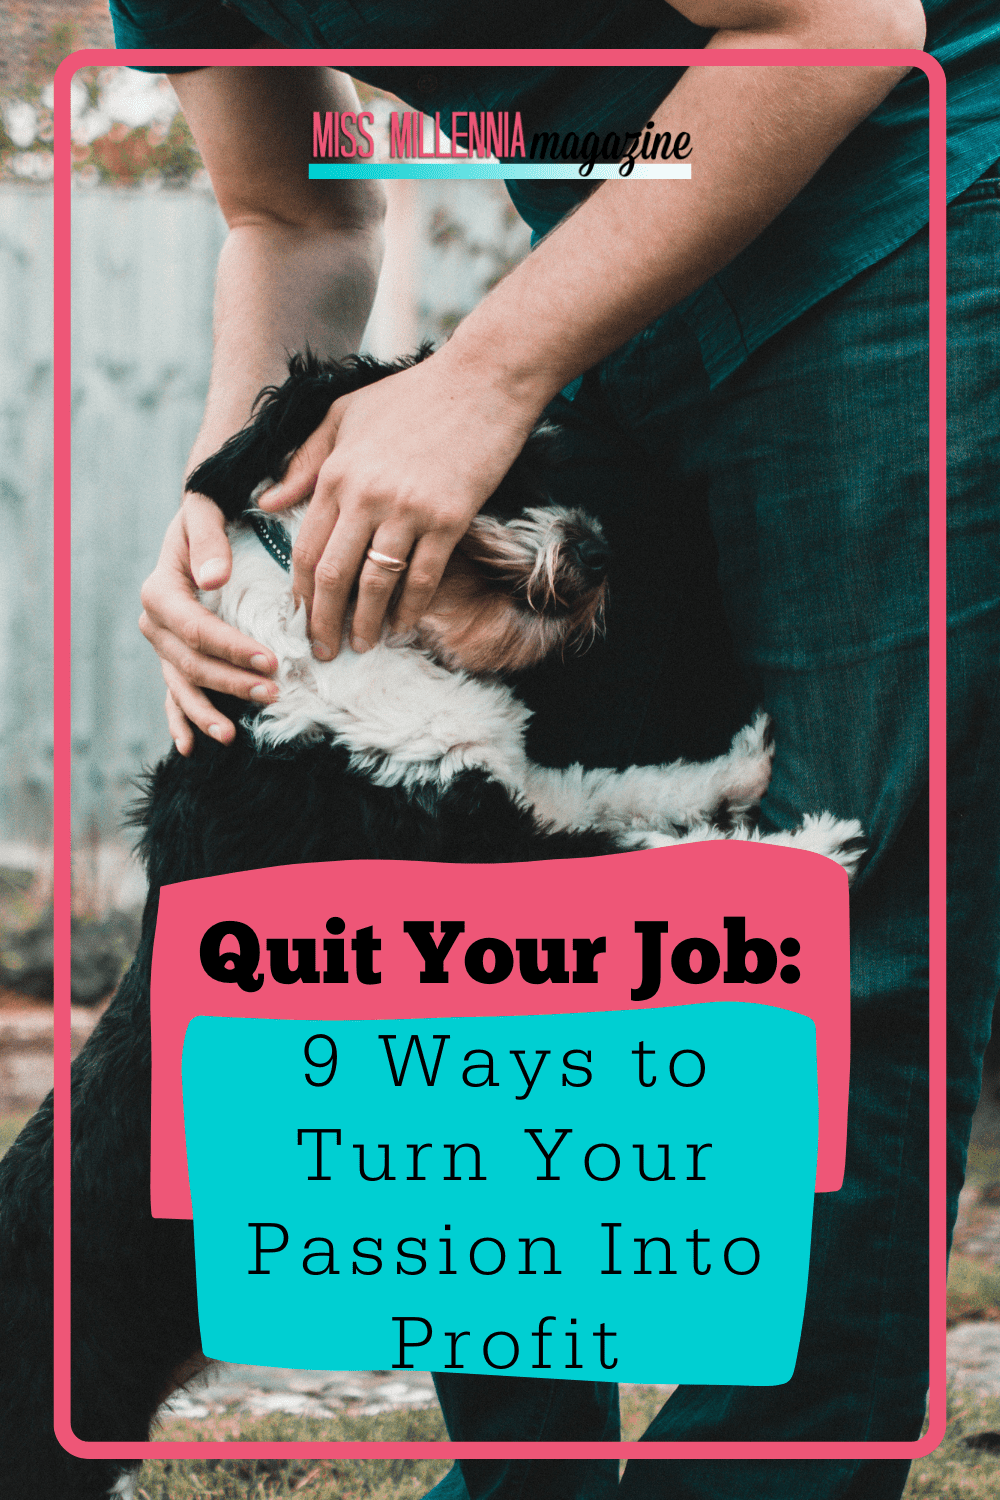 Quit Your Job: 9 Ways to Turn Your Passion Into Profit